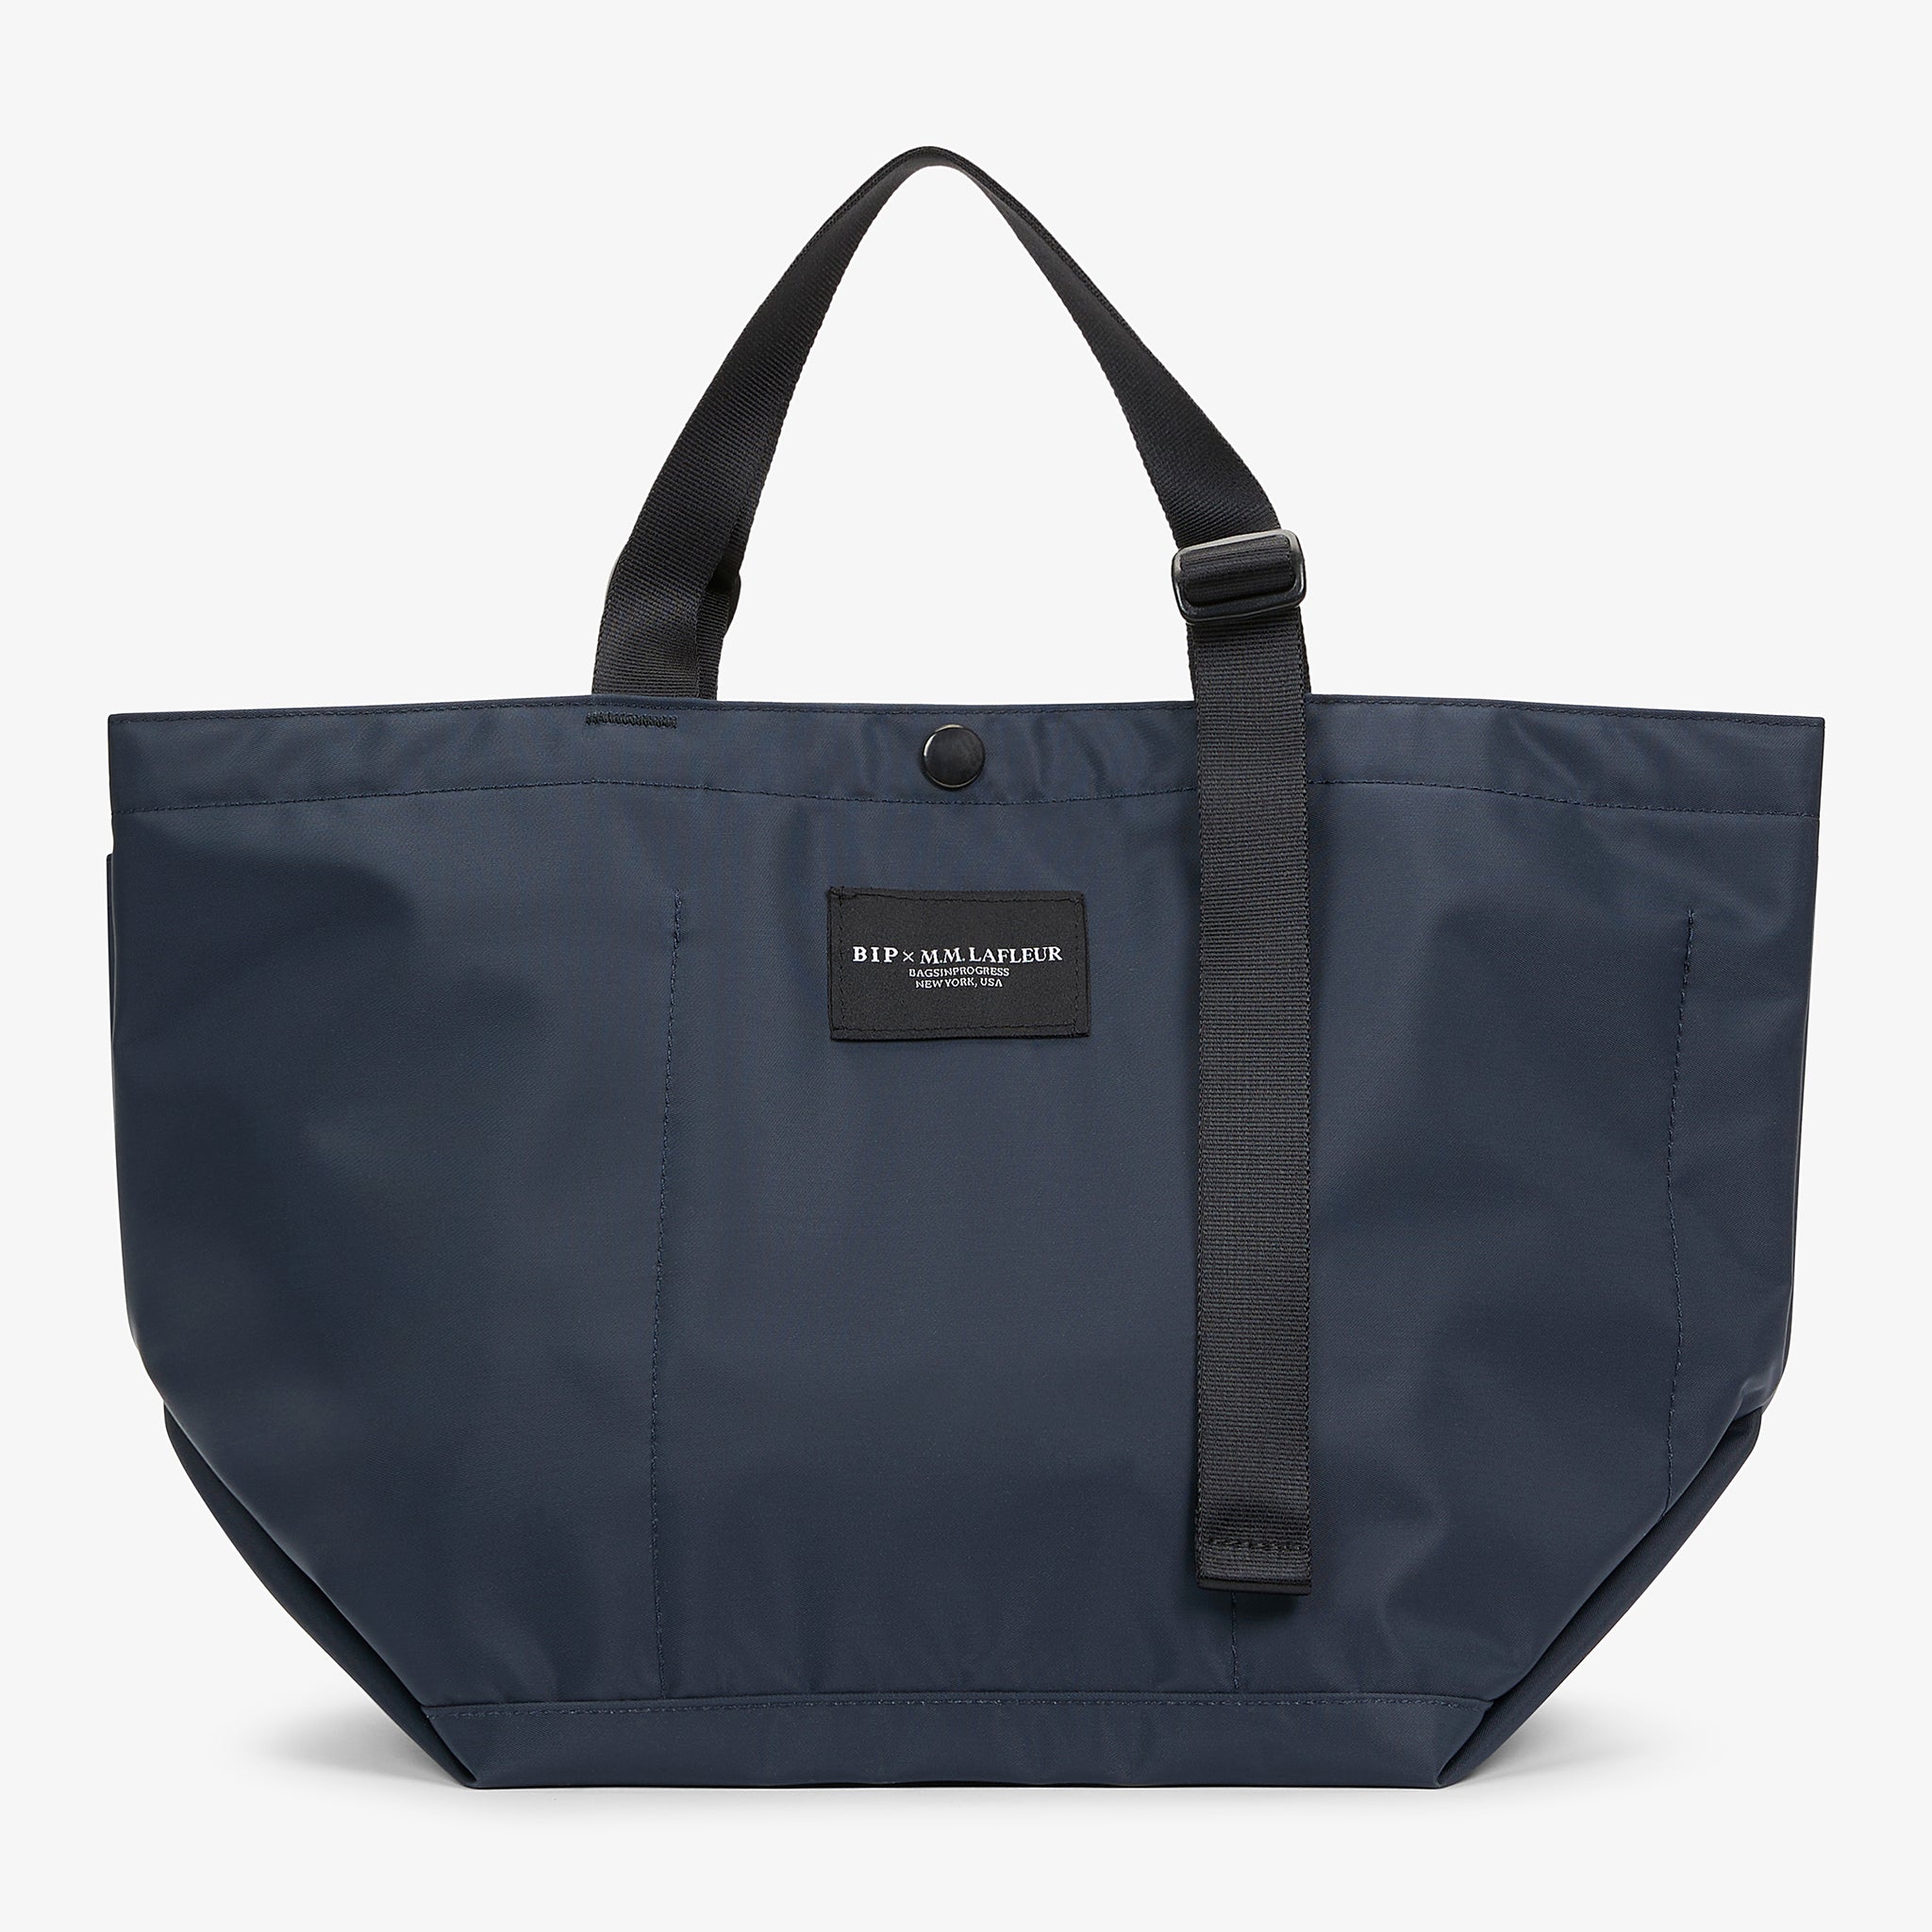 M.M.LaFleur x Bags in Progress Carry All Tote - Blue Other by M.M.LaFleur - One Size